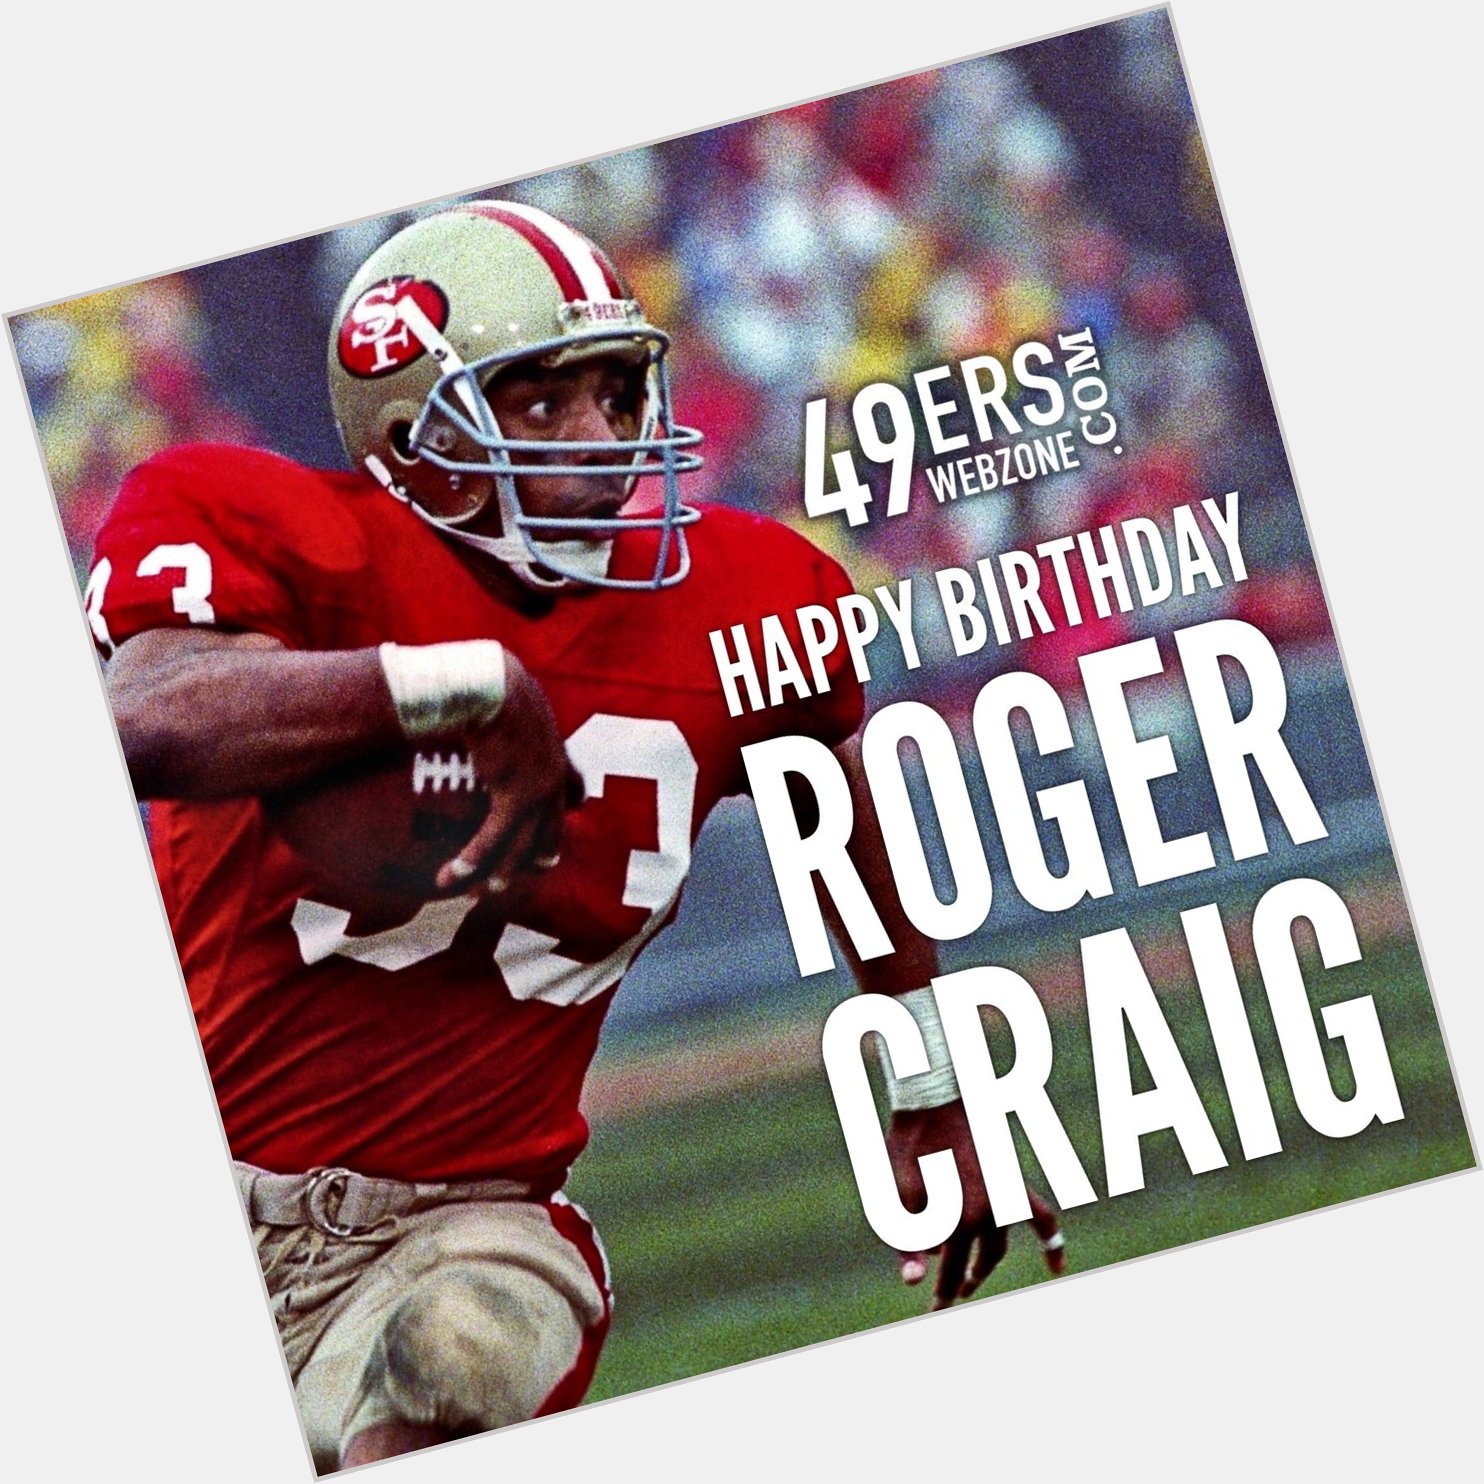 Happy 57th birthday to the great running back, Roger Craig. You should be in the Hall of Fame. 